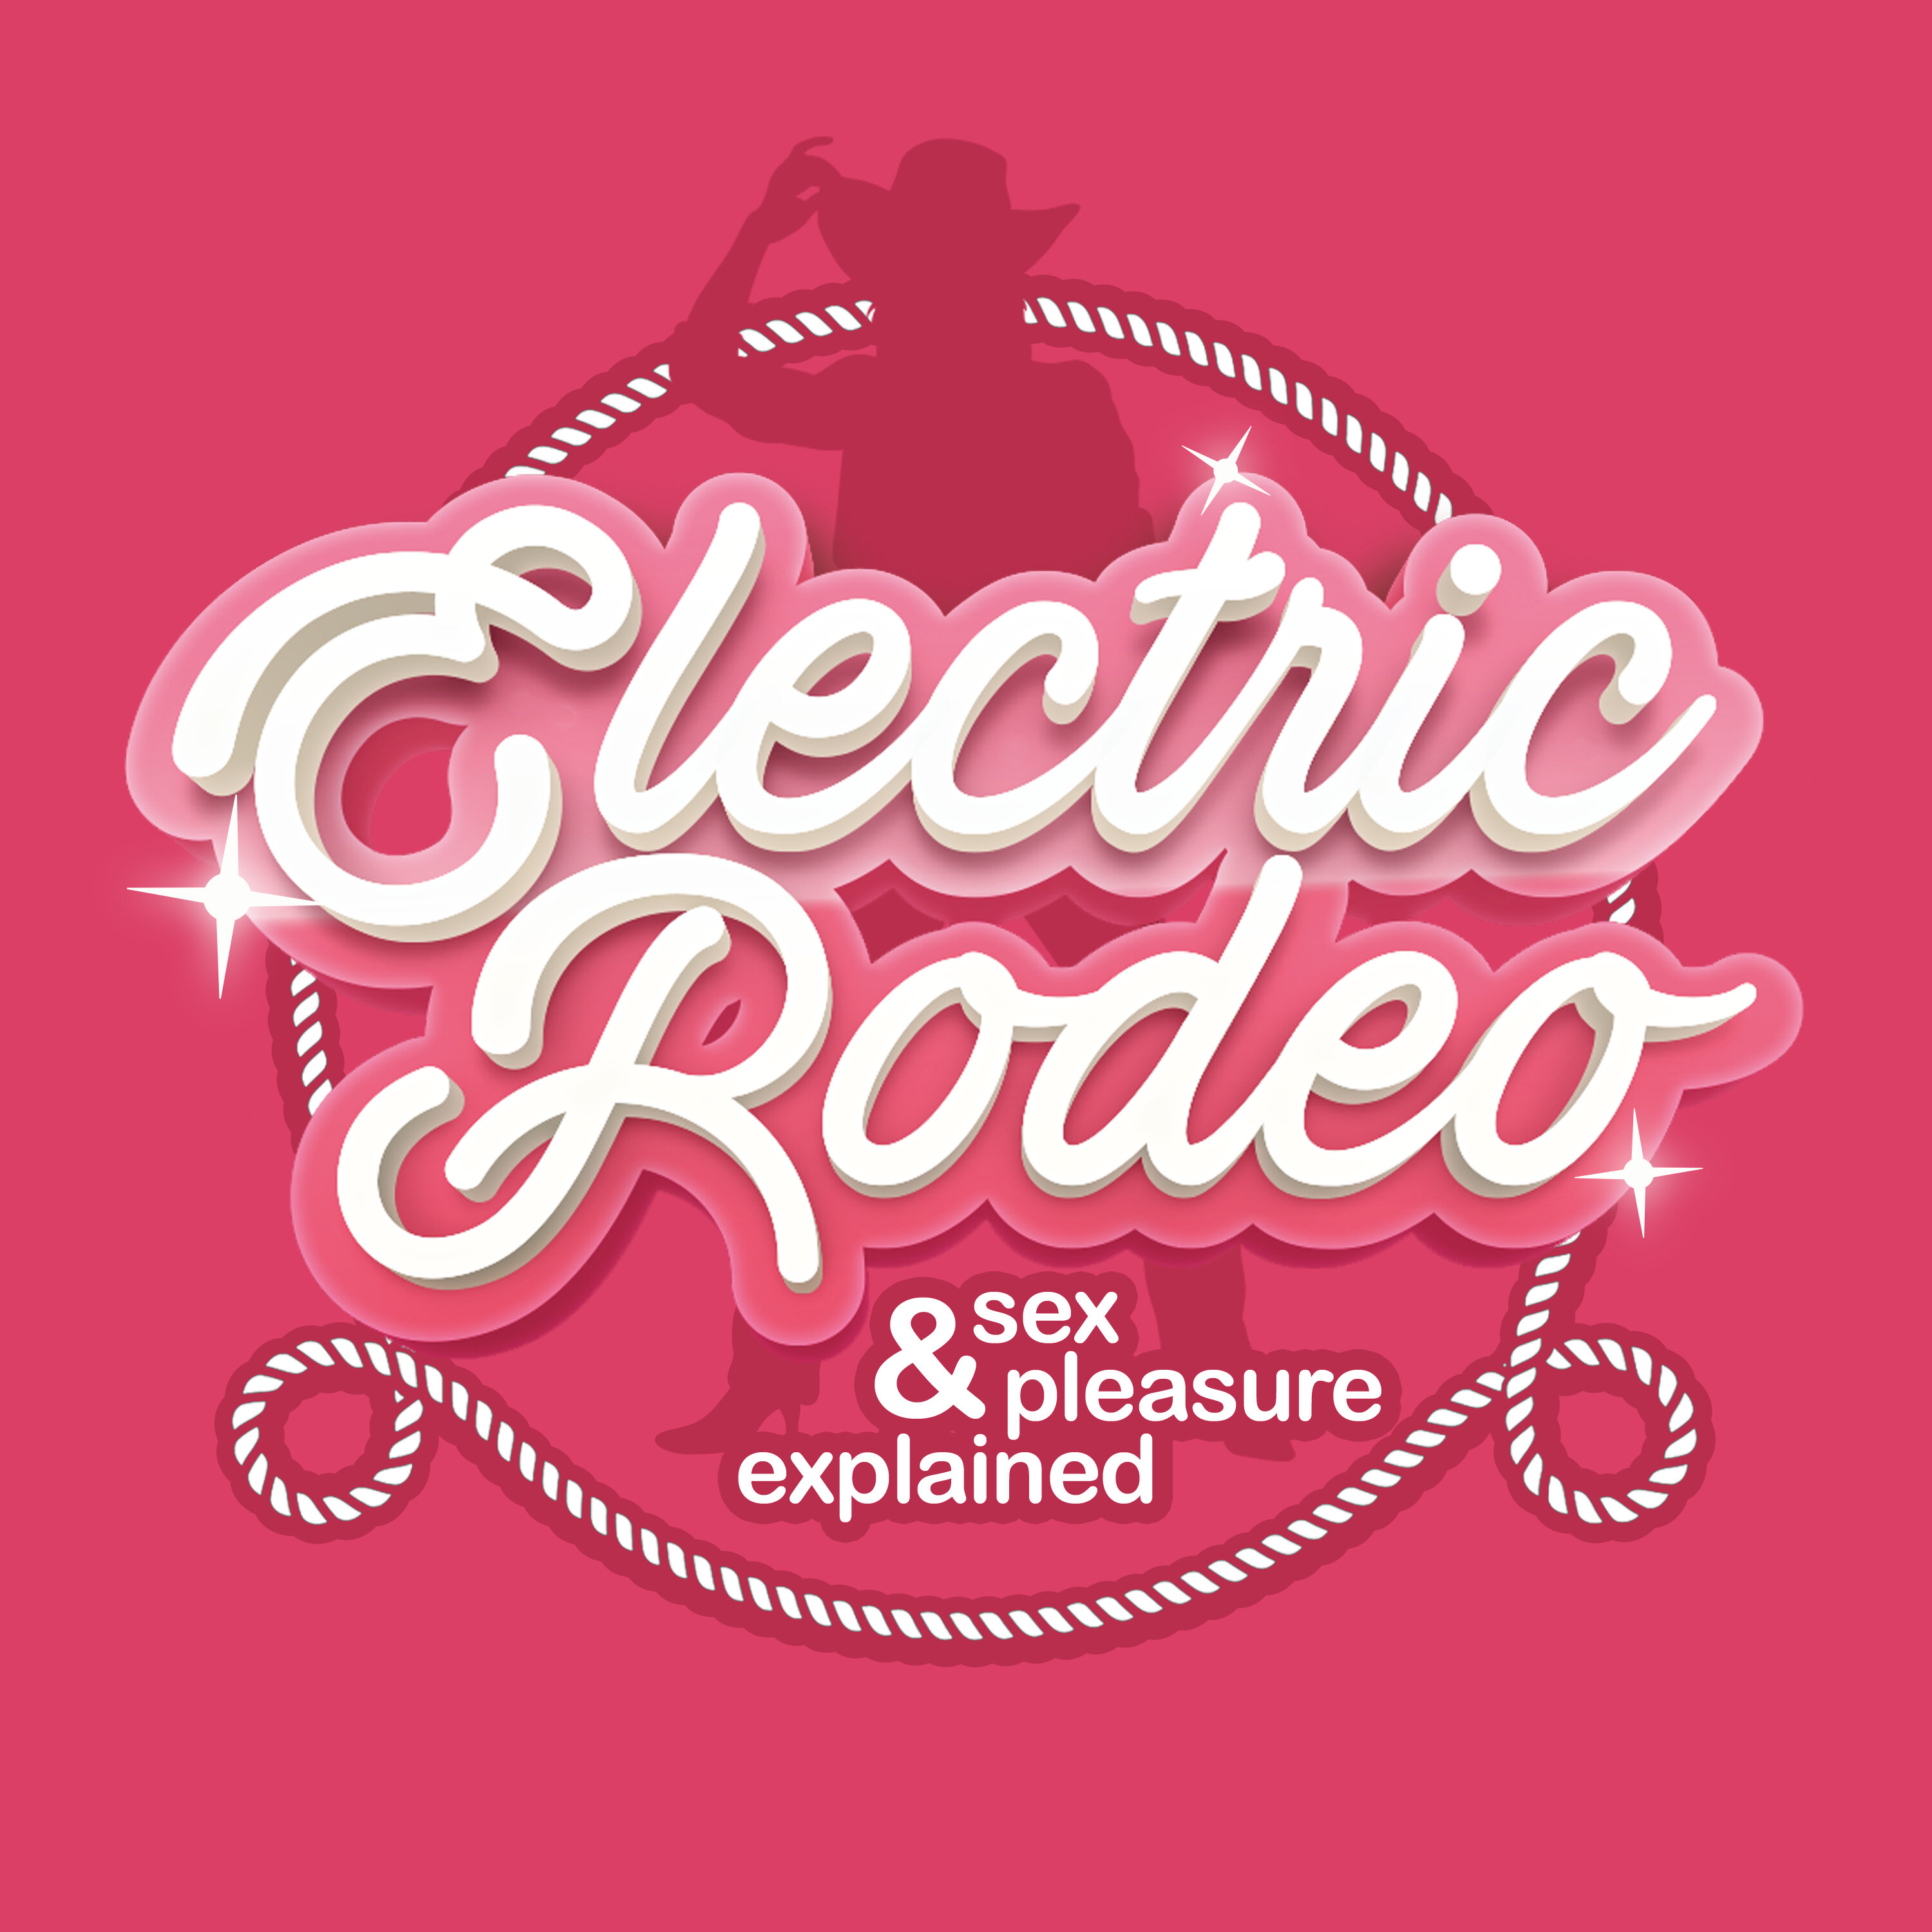 Electric Rodeo Trailer Image